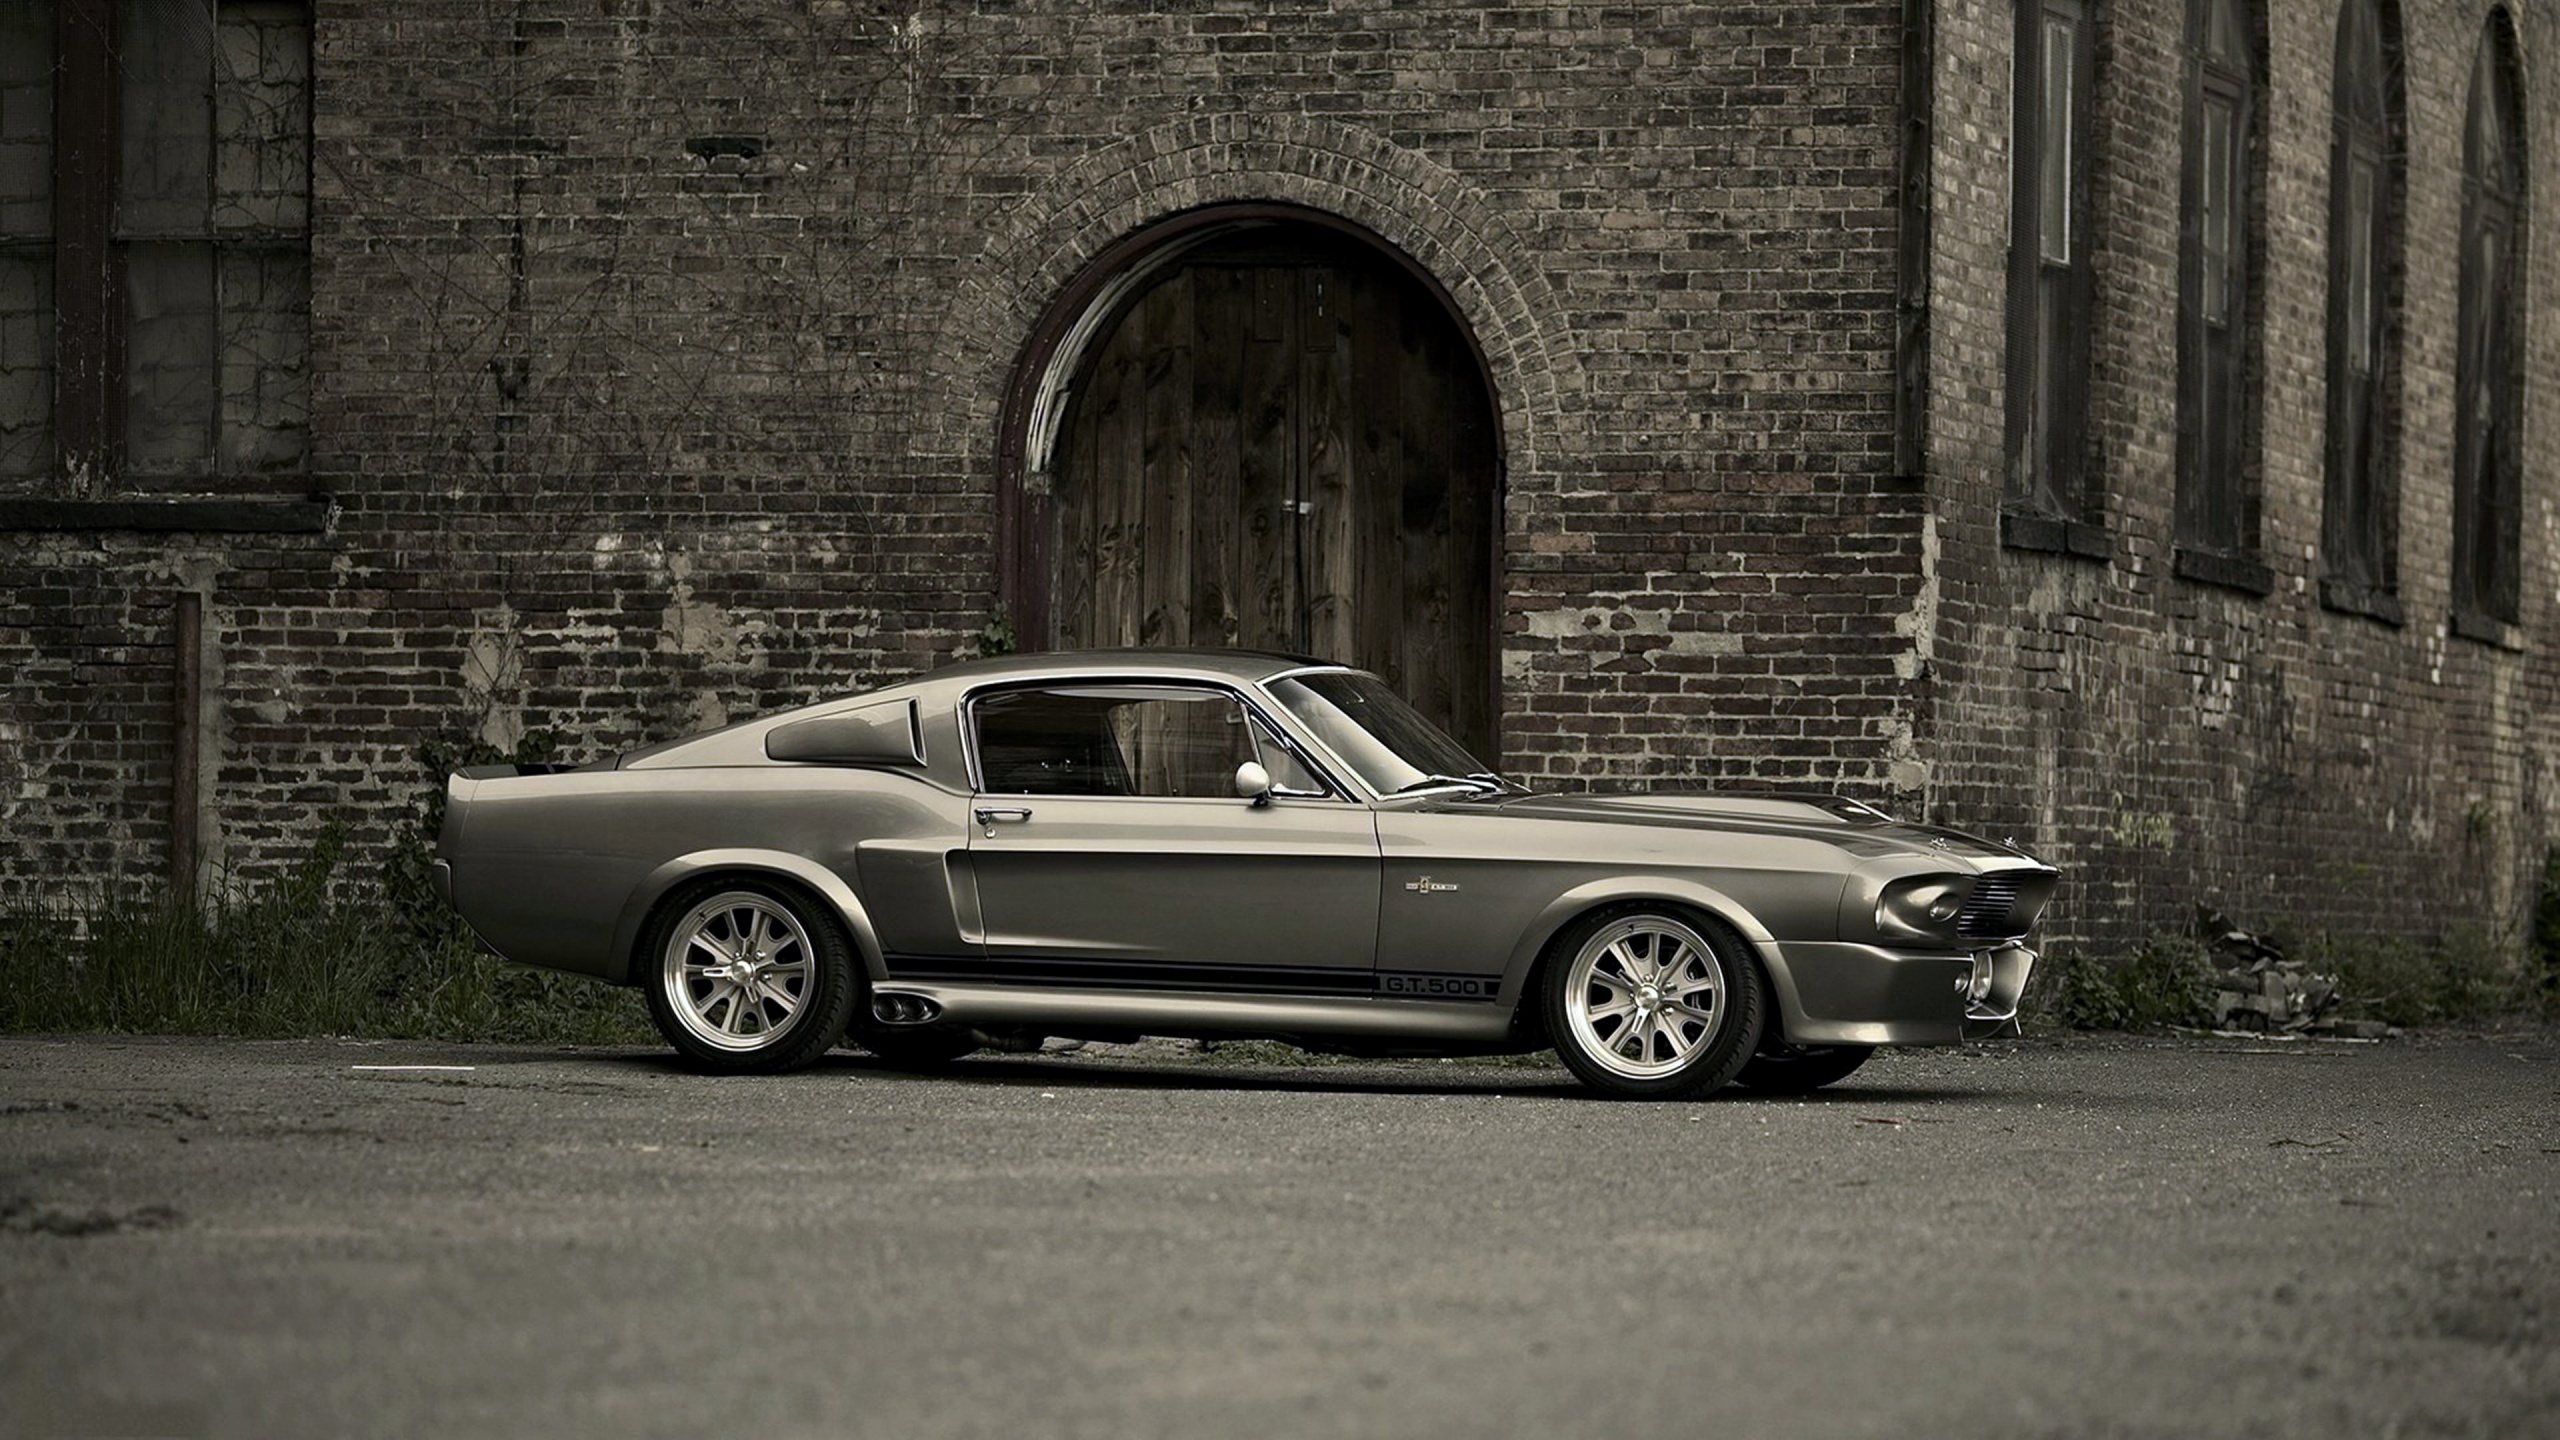 Grayscale Photo of Coupe Parked Beside Brick Wall. Wallpaper in 2560x1440 Resolution